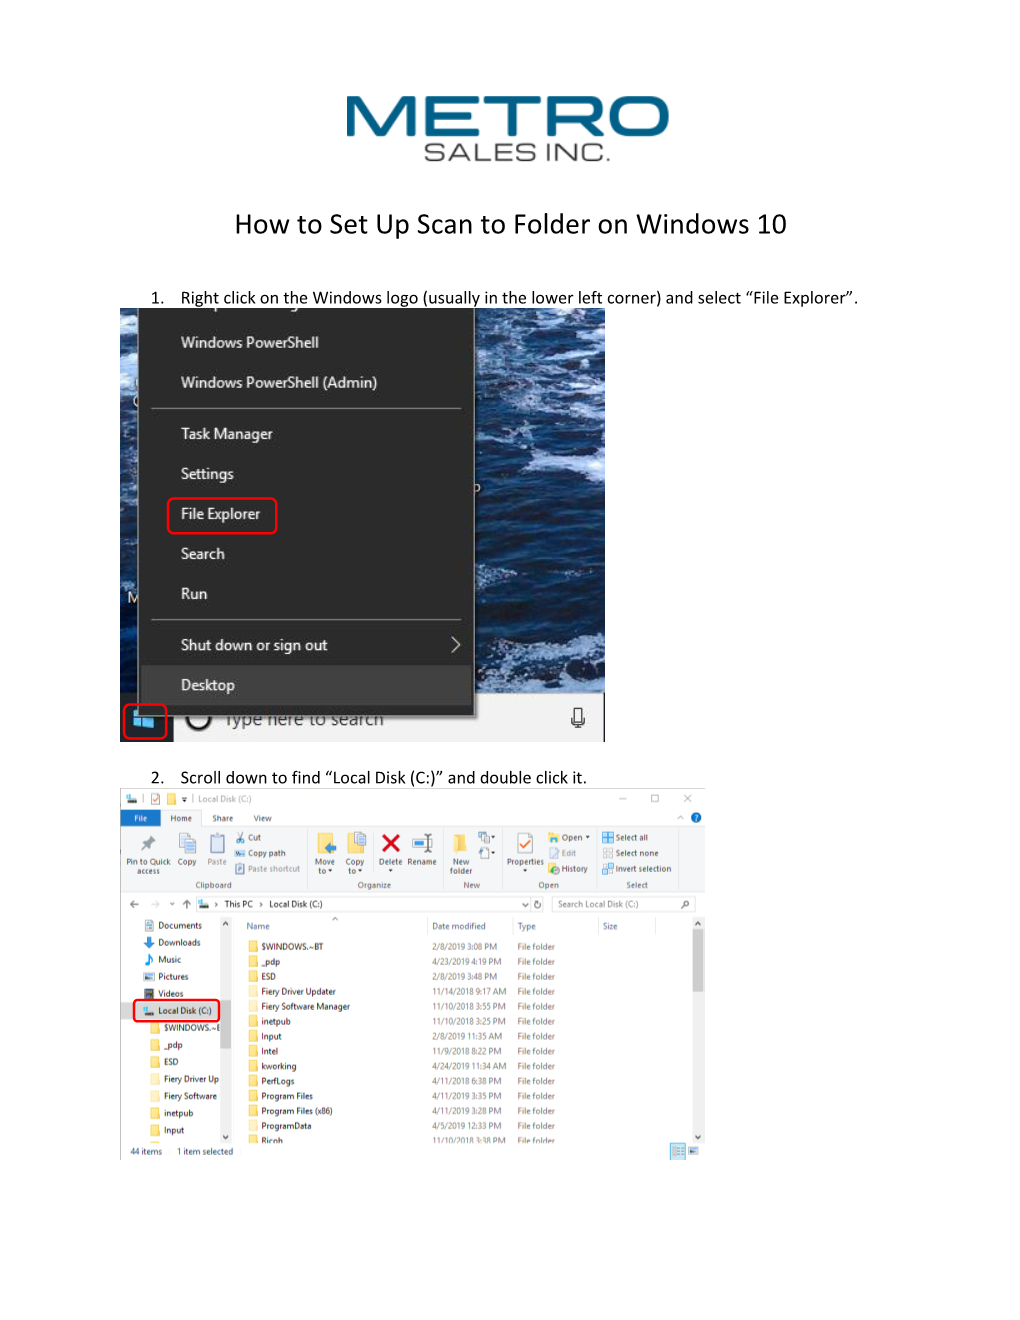 How to Set up Scan to Folder on Windows 10